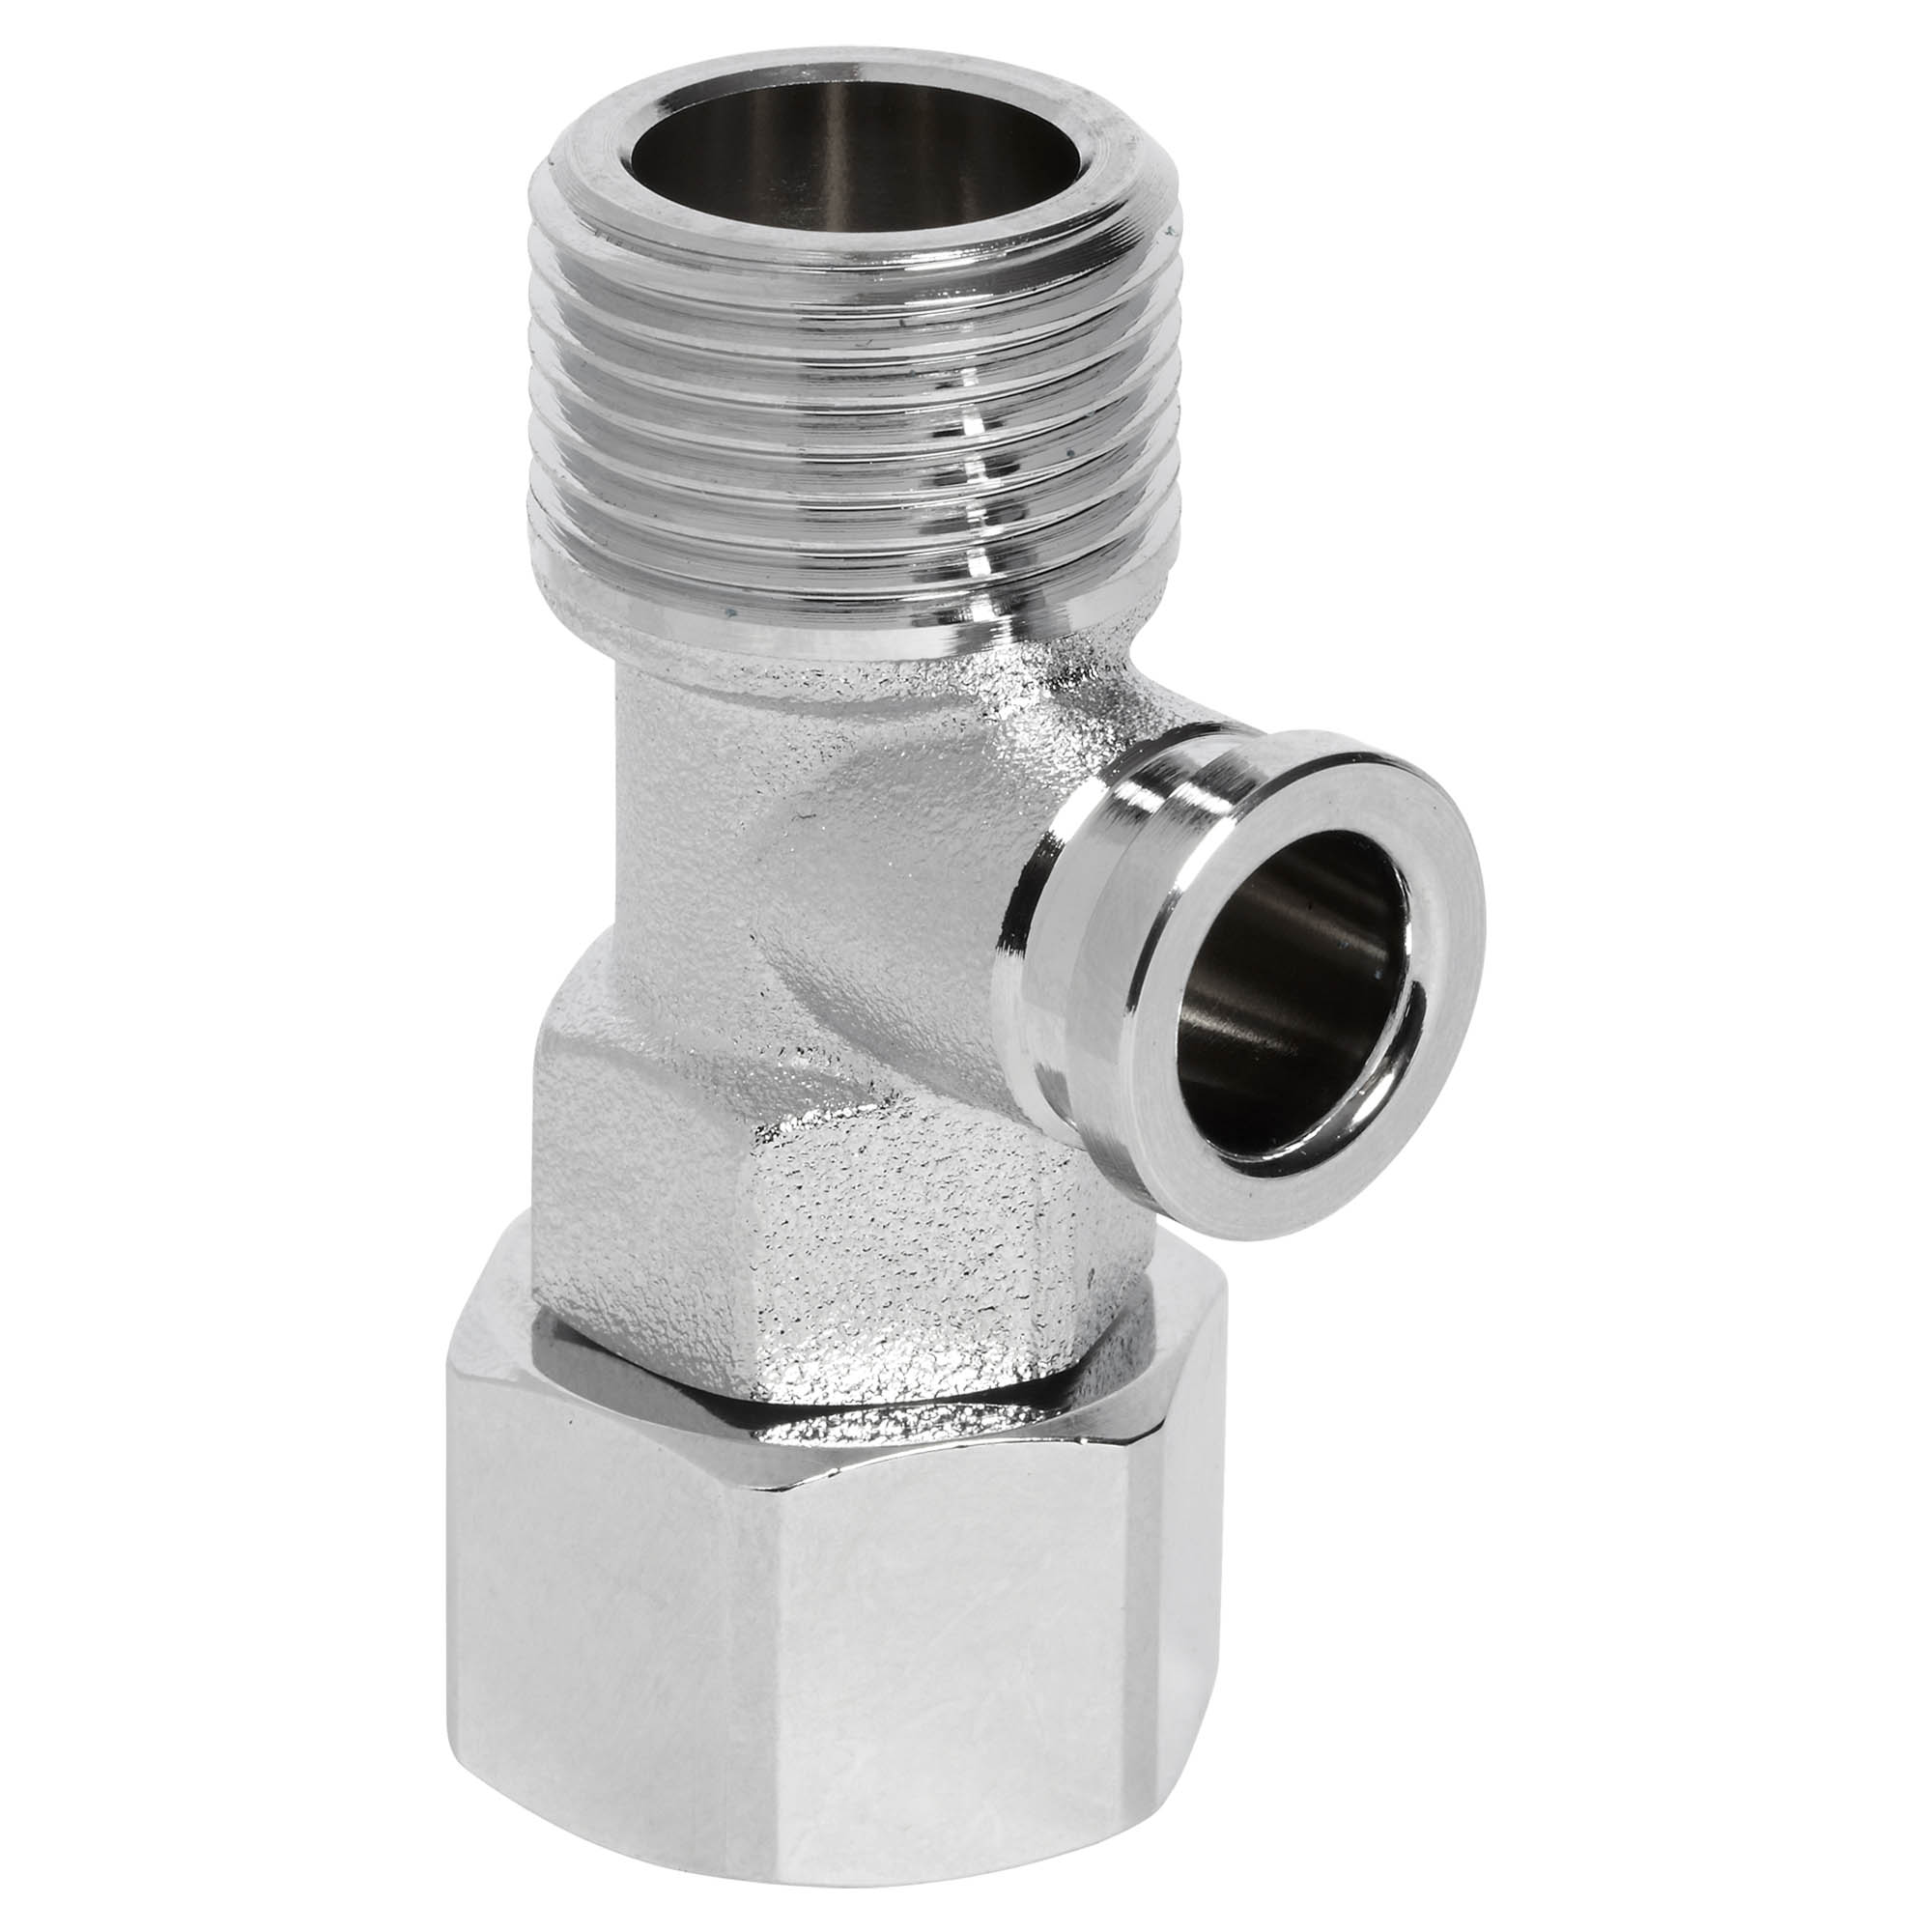 JUNCTION FITTING FOR WATER SUPPLY HOSE